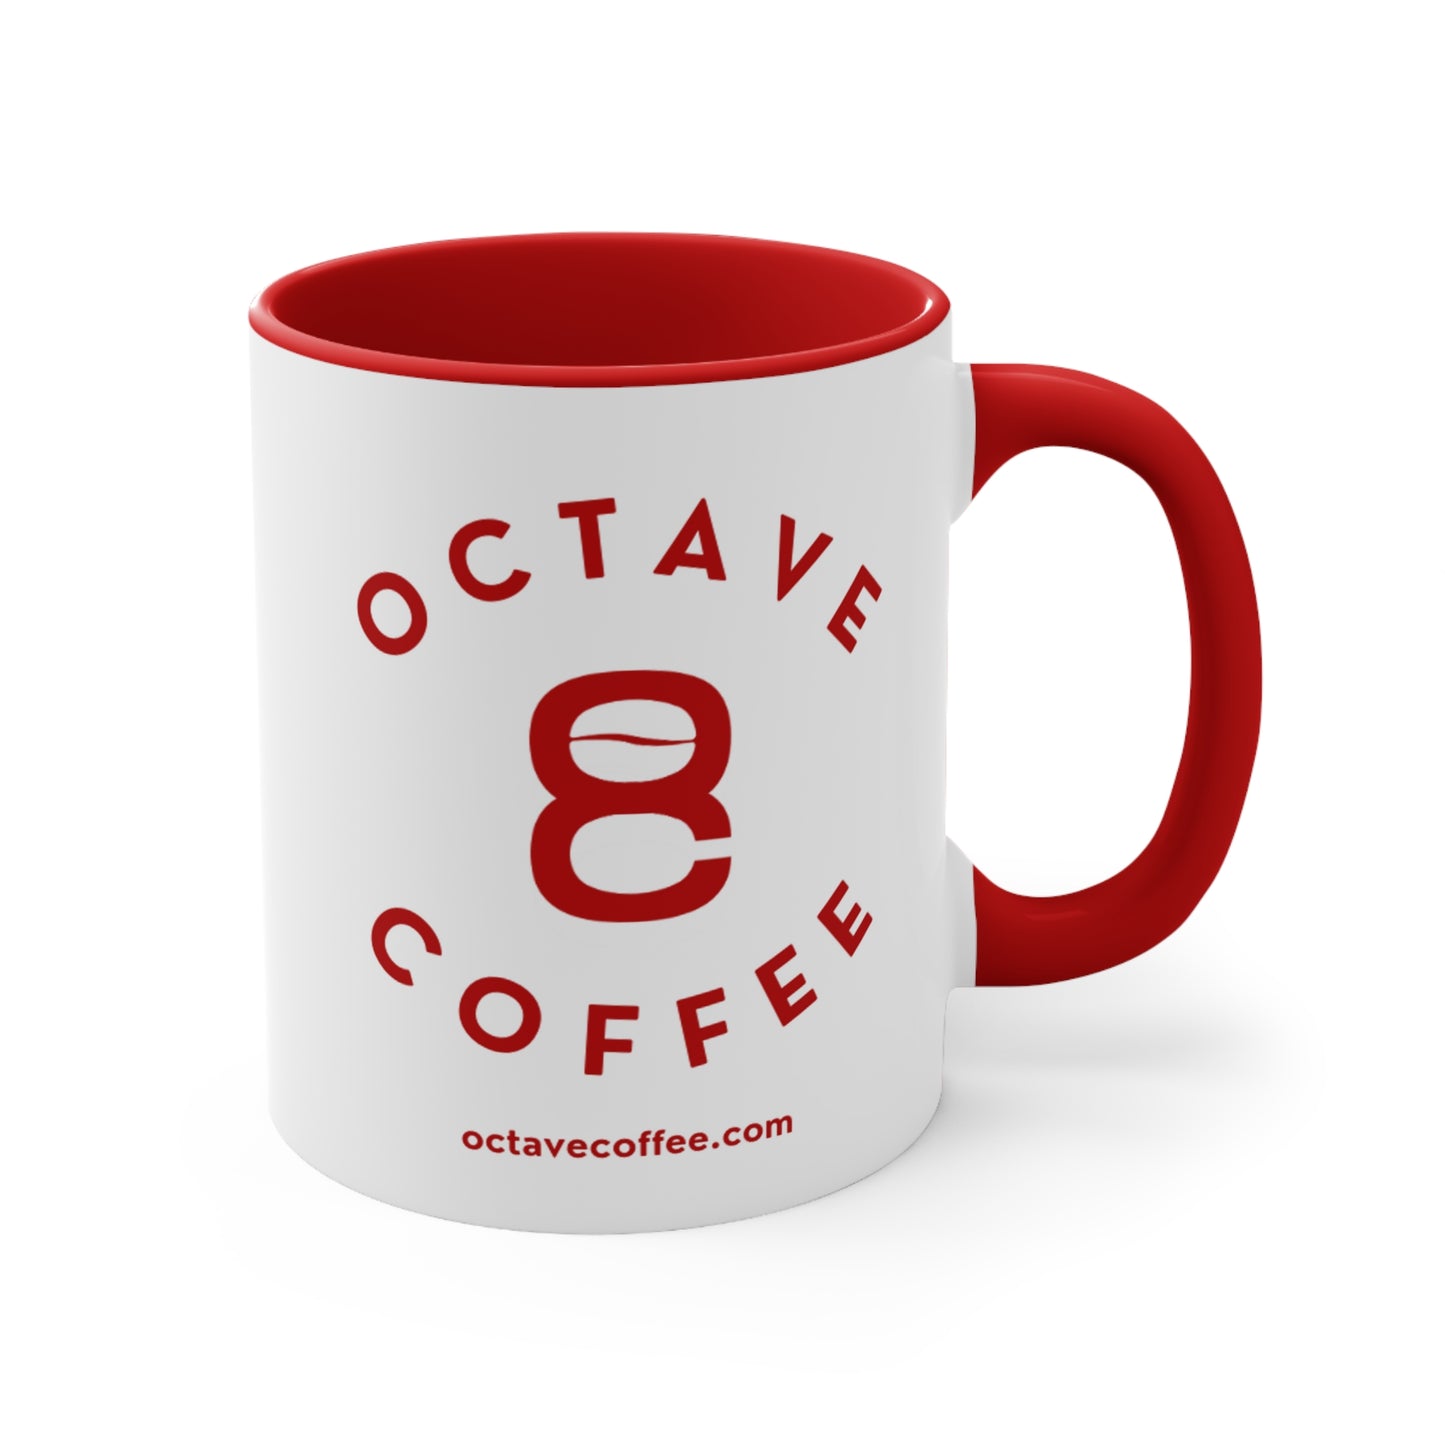 Octave Coffee Two-Tone Mug - Octave Coffee Co.